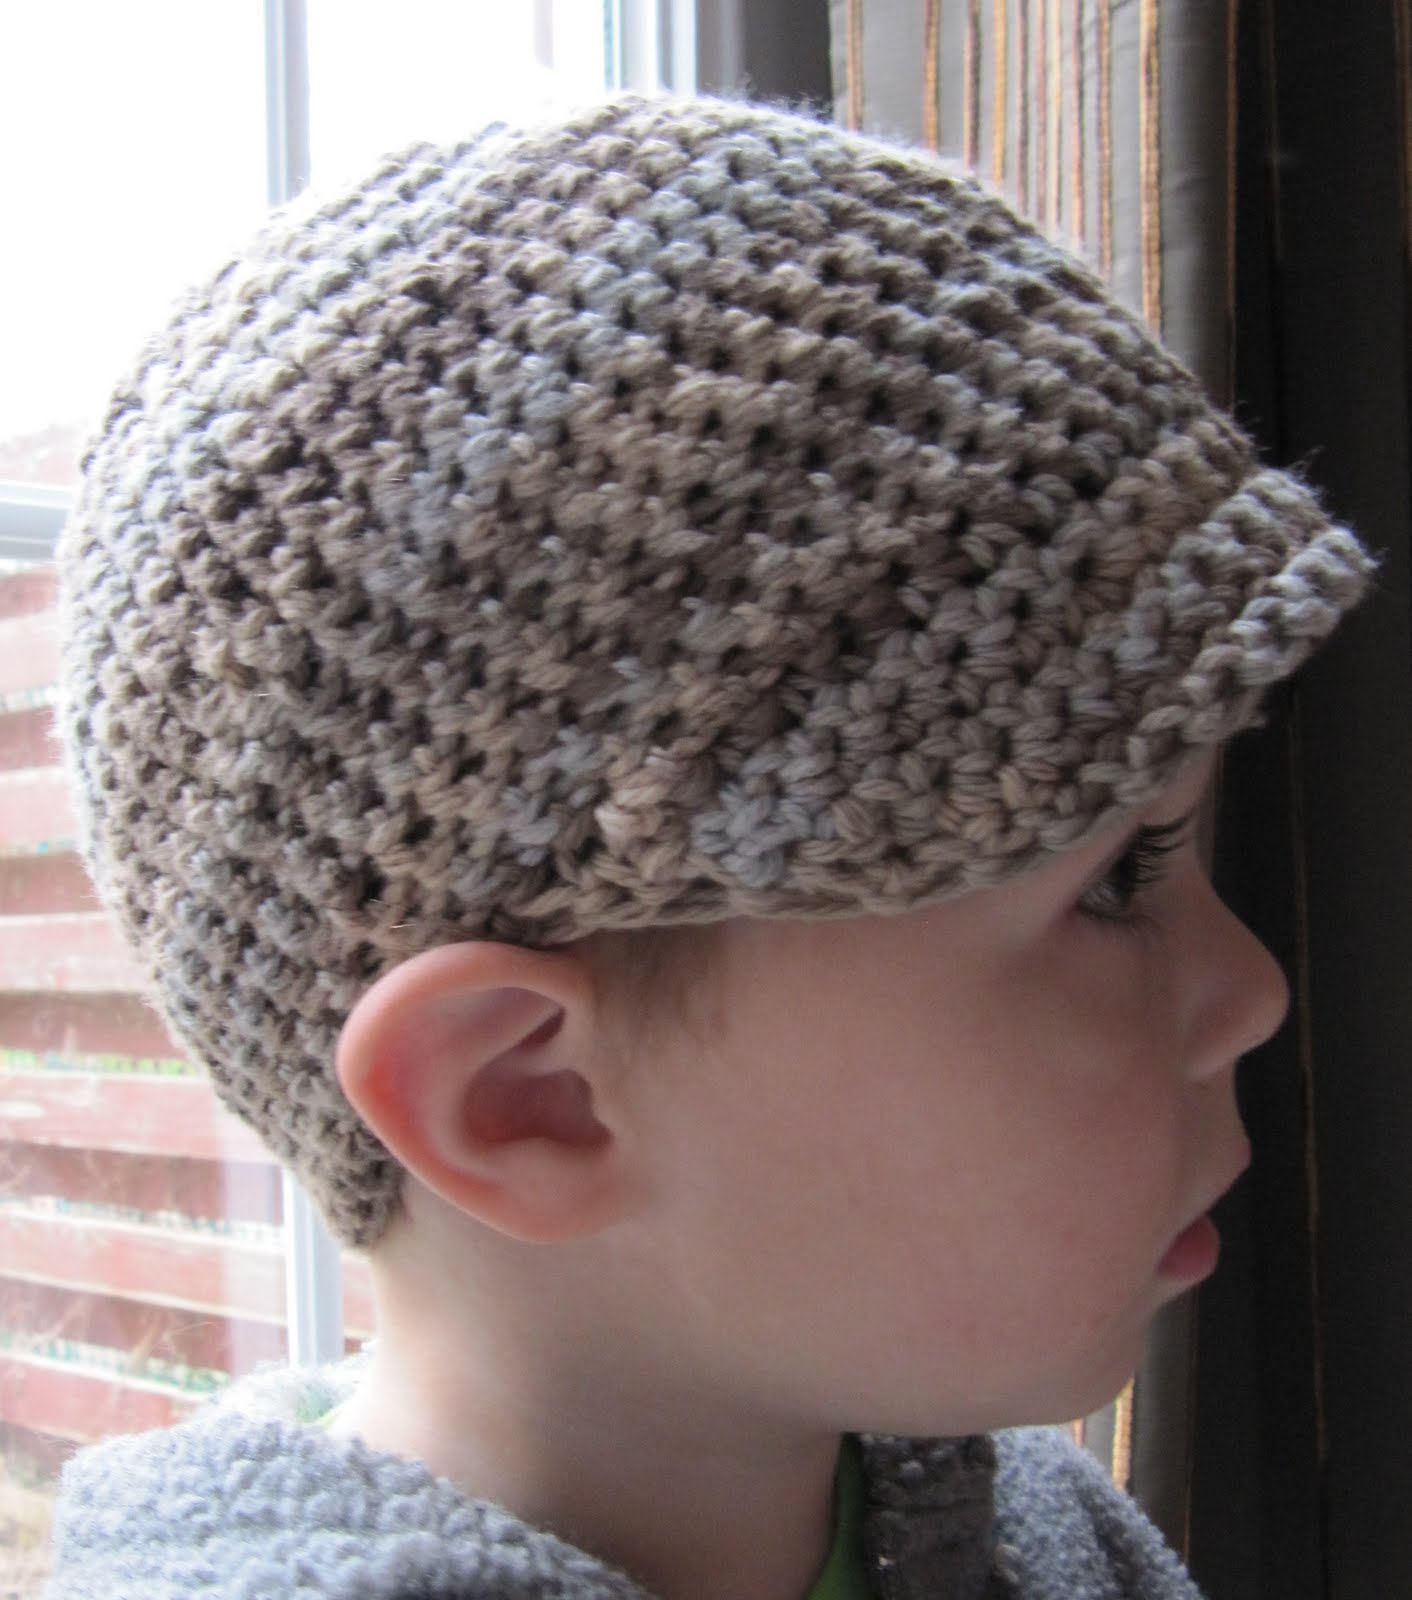 KIDS CROCHETED BEANIE WITH FRONT BRIM PATTERN – Easy Crochet Patterns